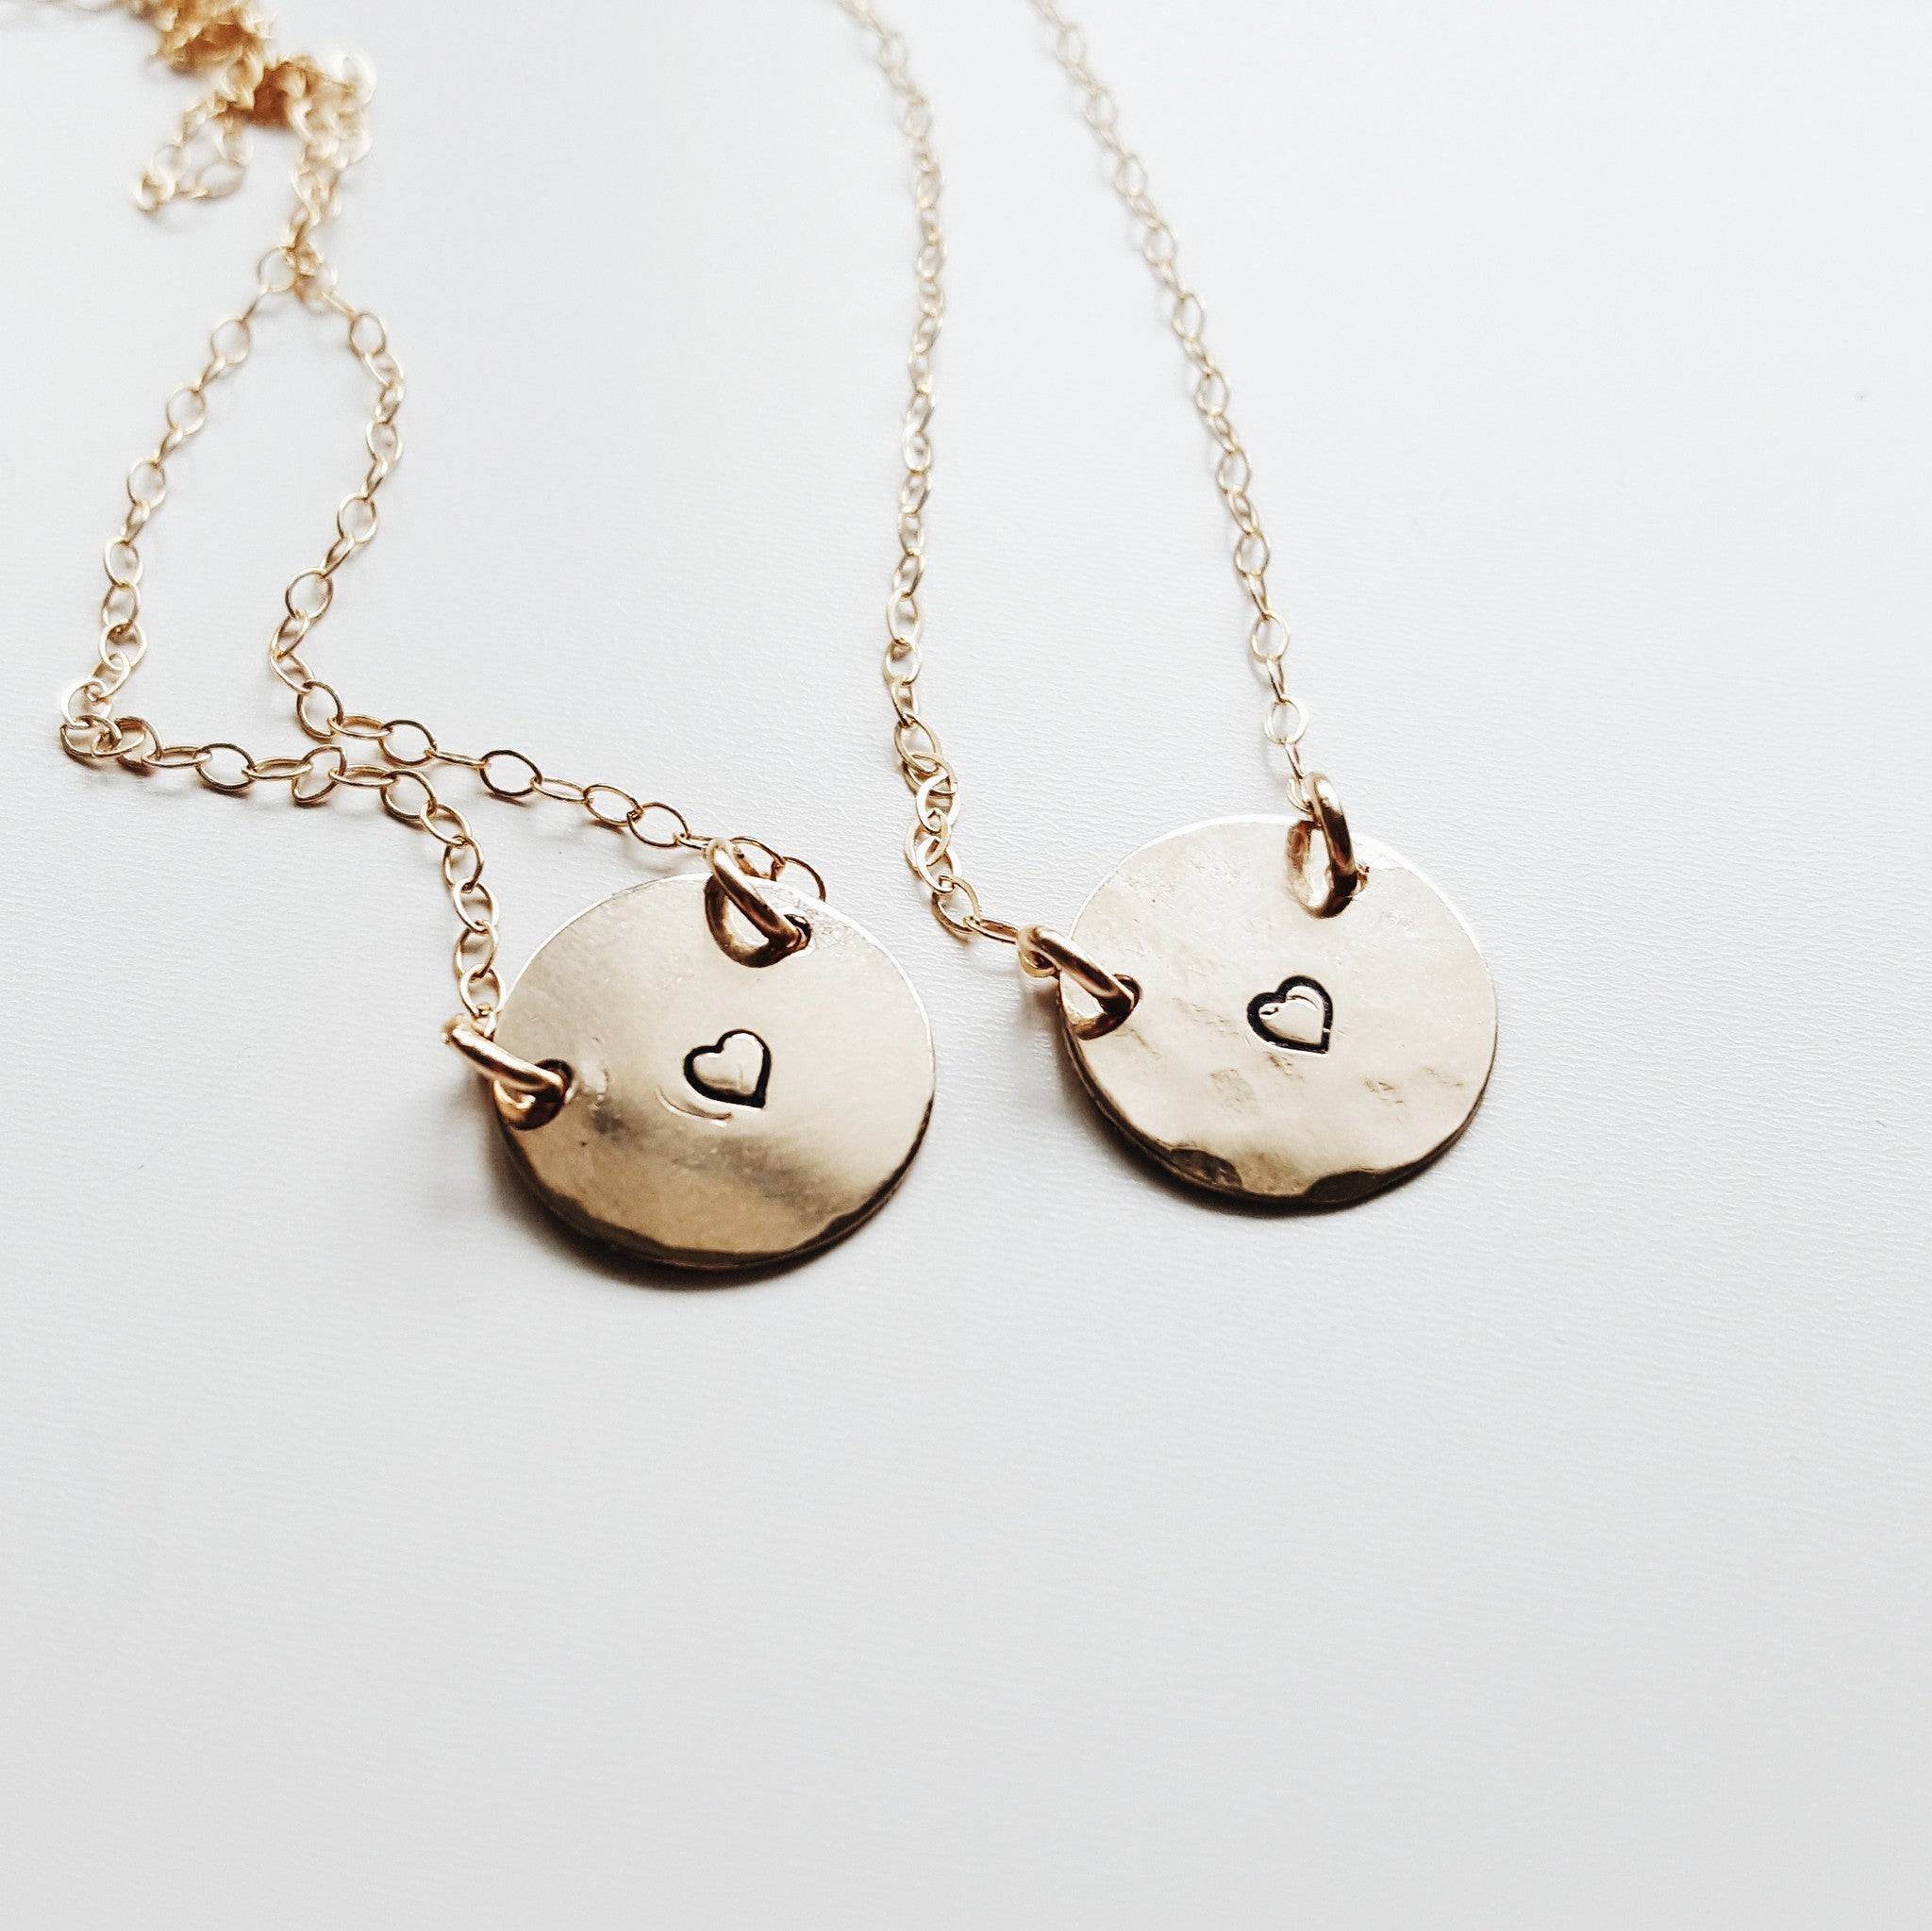 two small gold round pendants with a small heart stamped on the middle of each, on gold chains shown on a white background